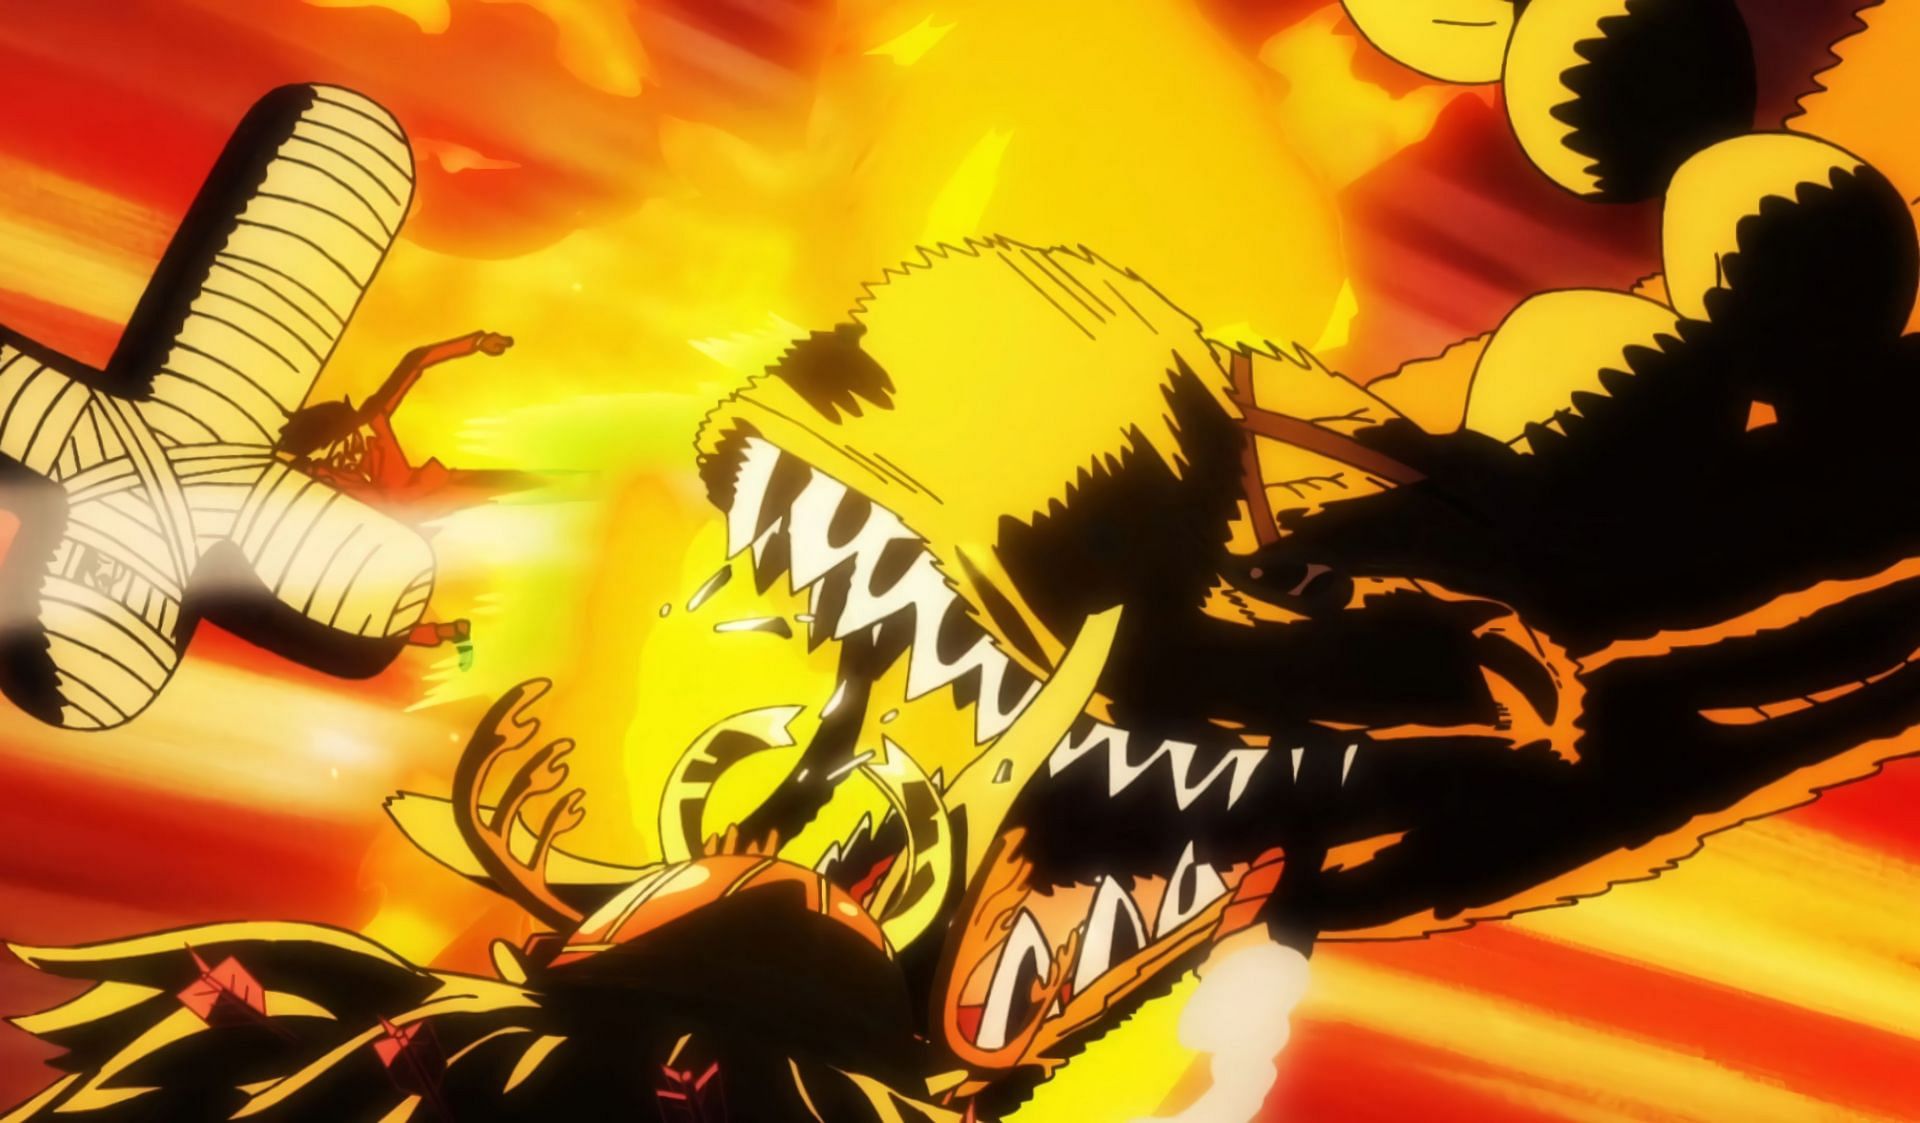 Sanji attacking Queen in One Piece episode 1036 (Image via Toei Animation)